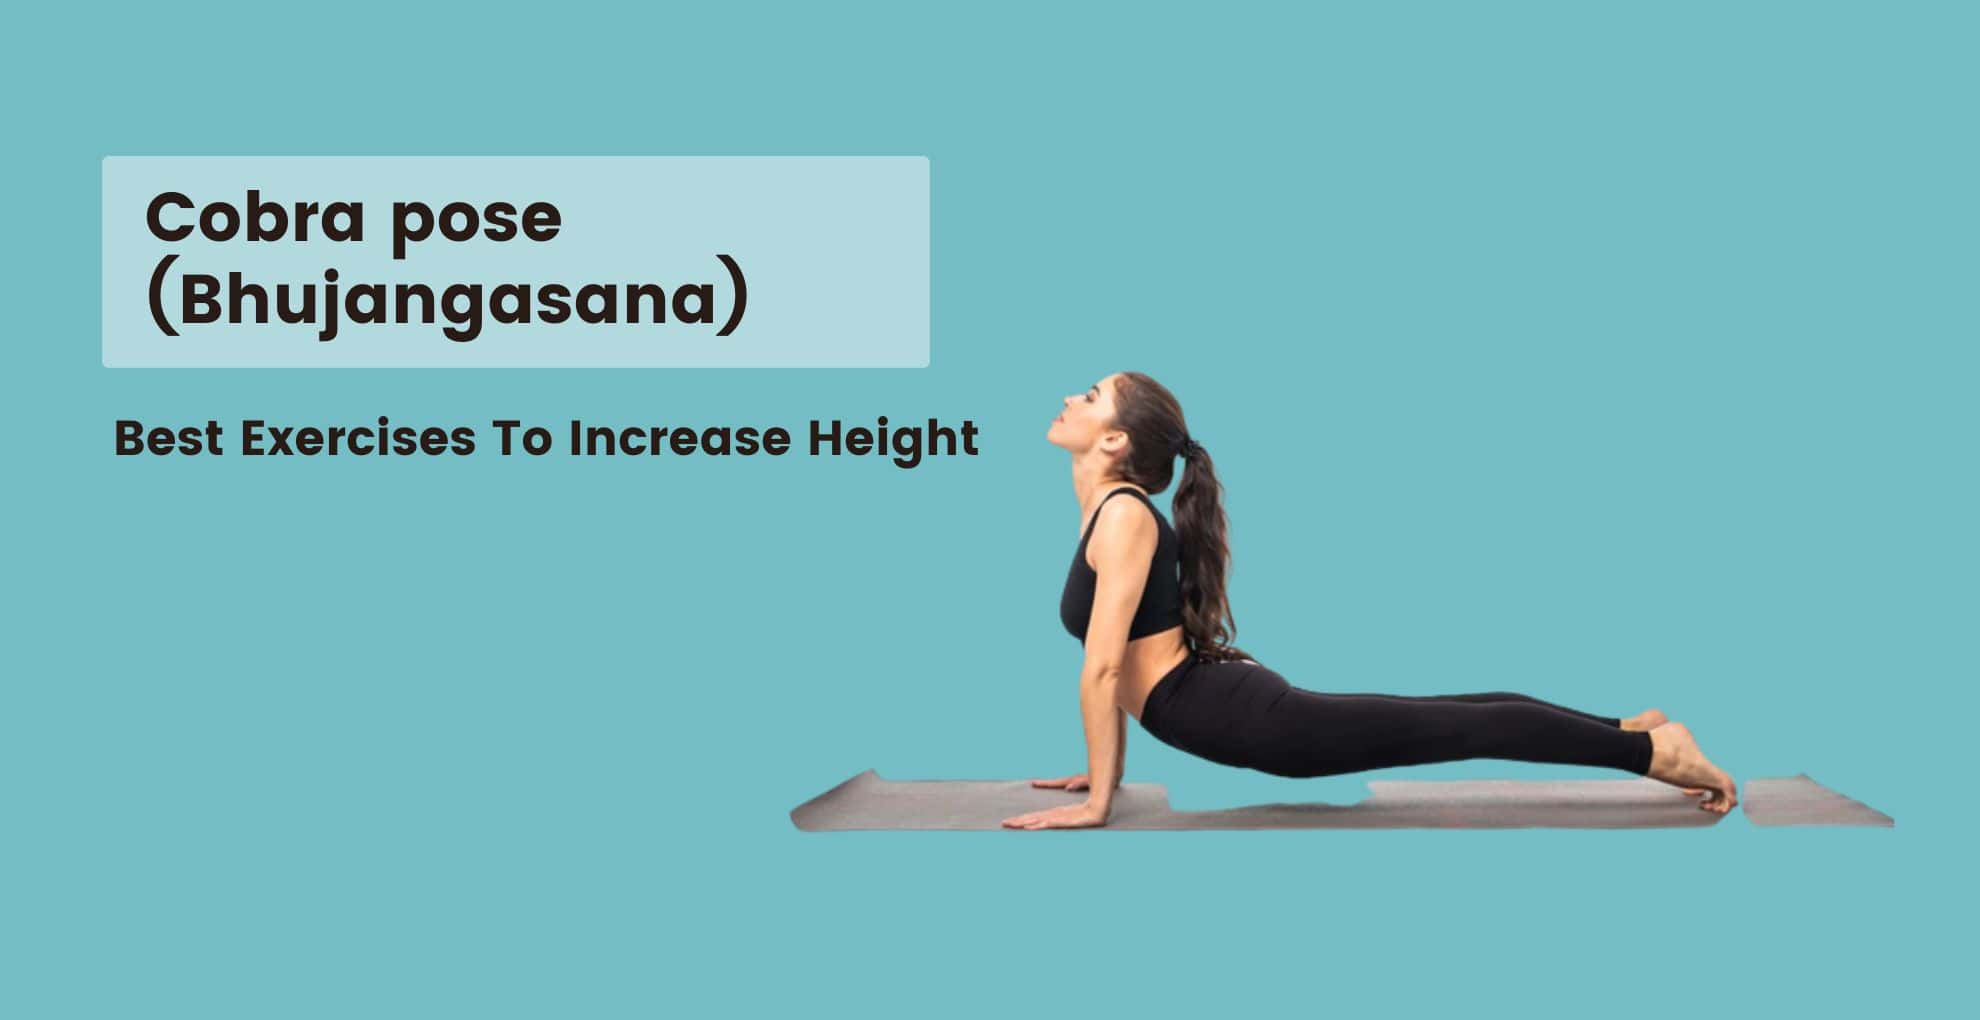 Can You Increase Your Height With Yoga? | HealthNews